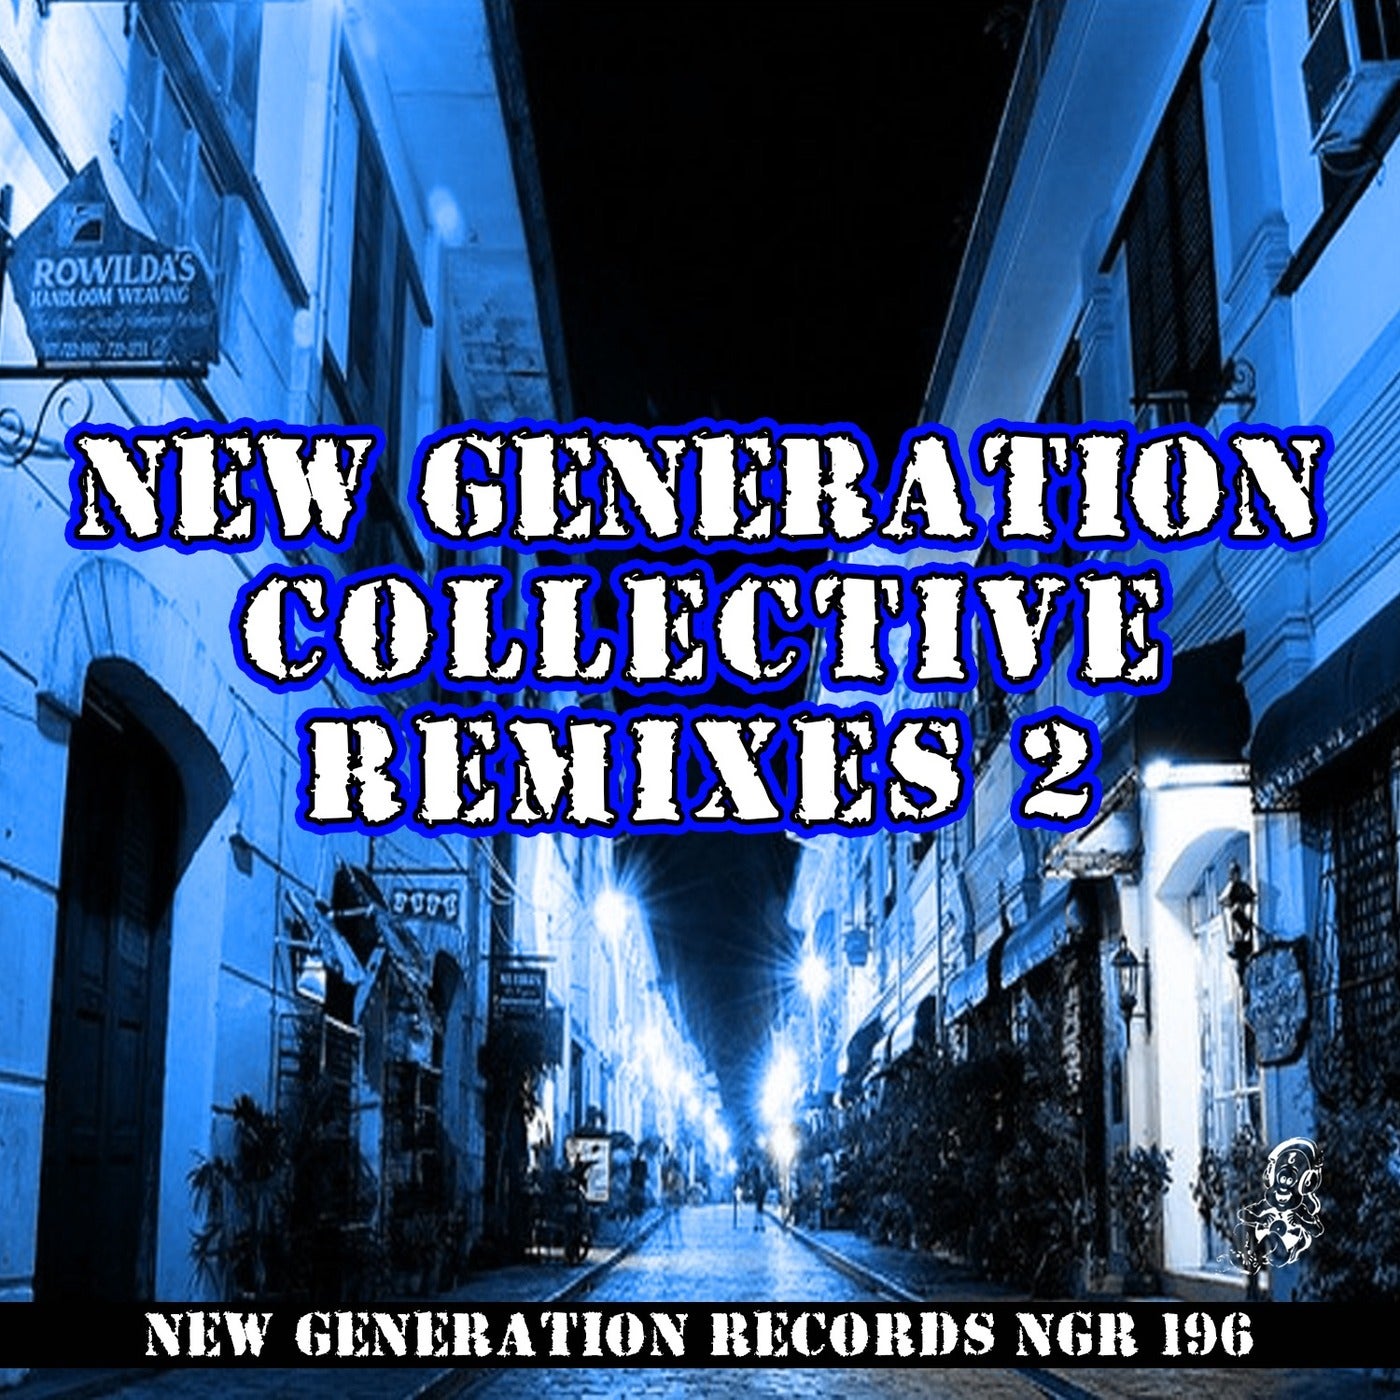 New Generation Collective Remixes 2